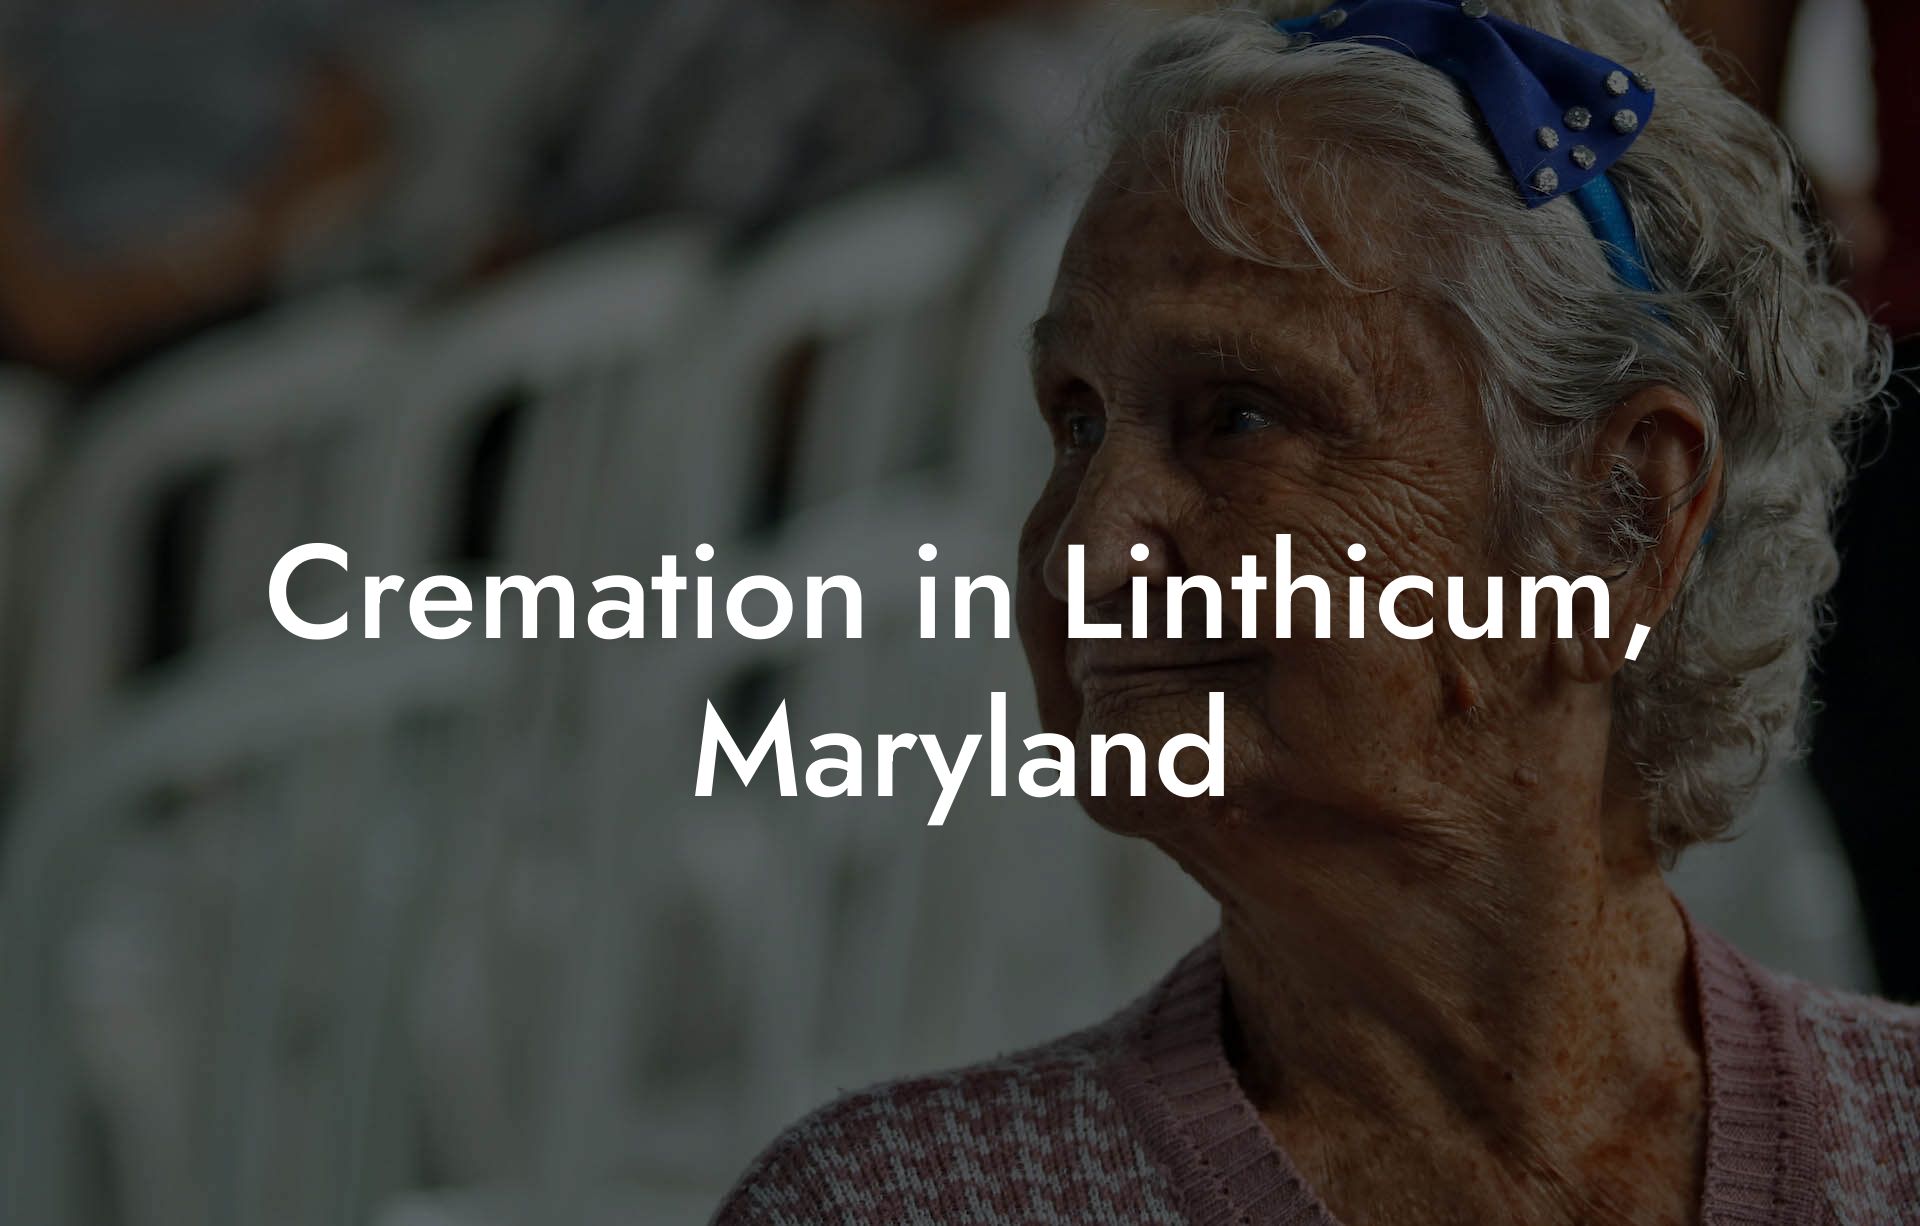 Cremation in Linthicum, Maryland